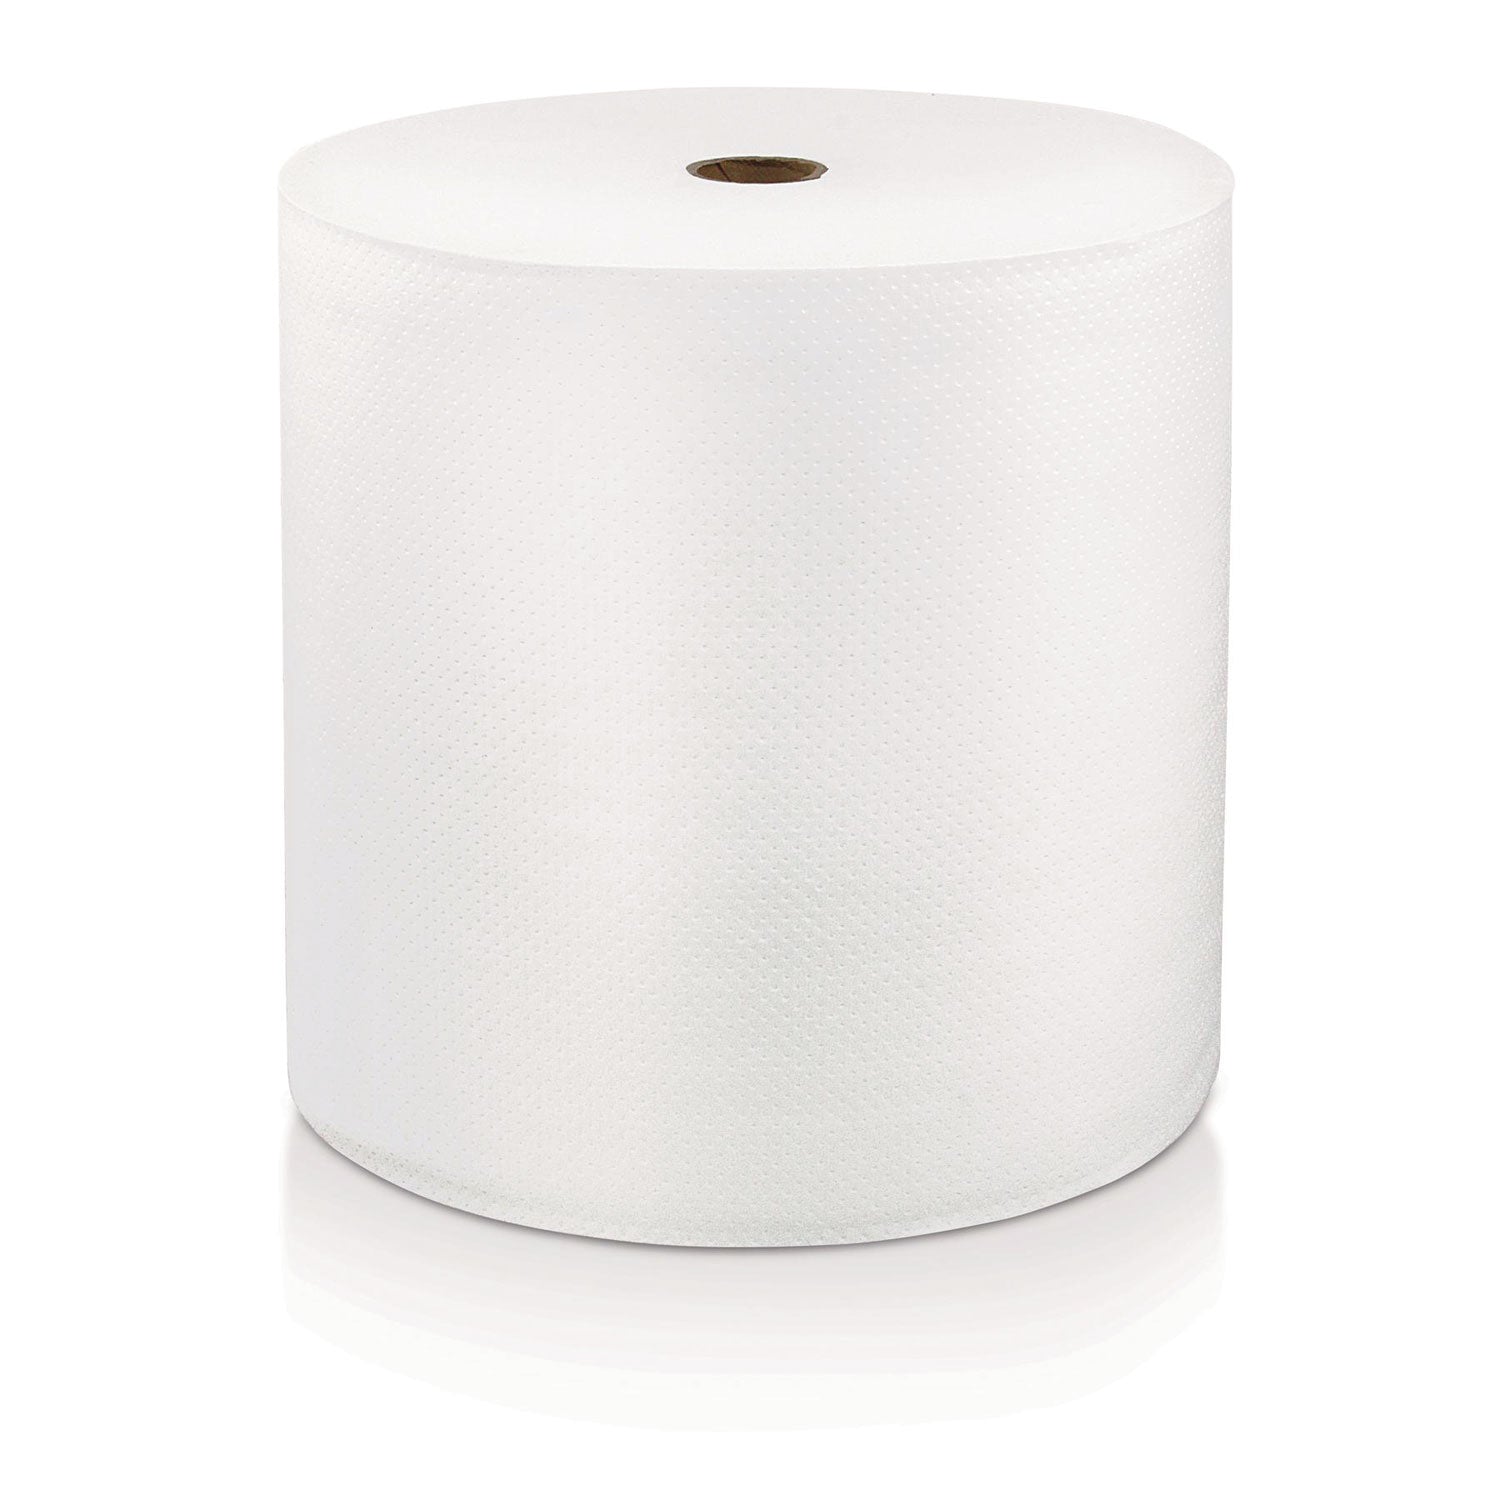 LoCor Hard Wound Roll Towels - 1 Ply - 7" x 800 ft - White - Virgin Fiber - Embossed, Strong, Absorbent - For Washroom - 6 Rolls Per Carton - 6 / Carton - 1